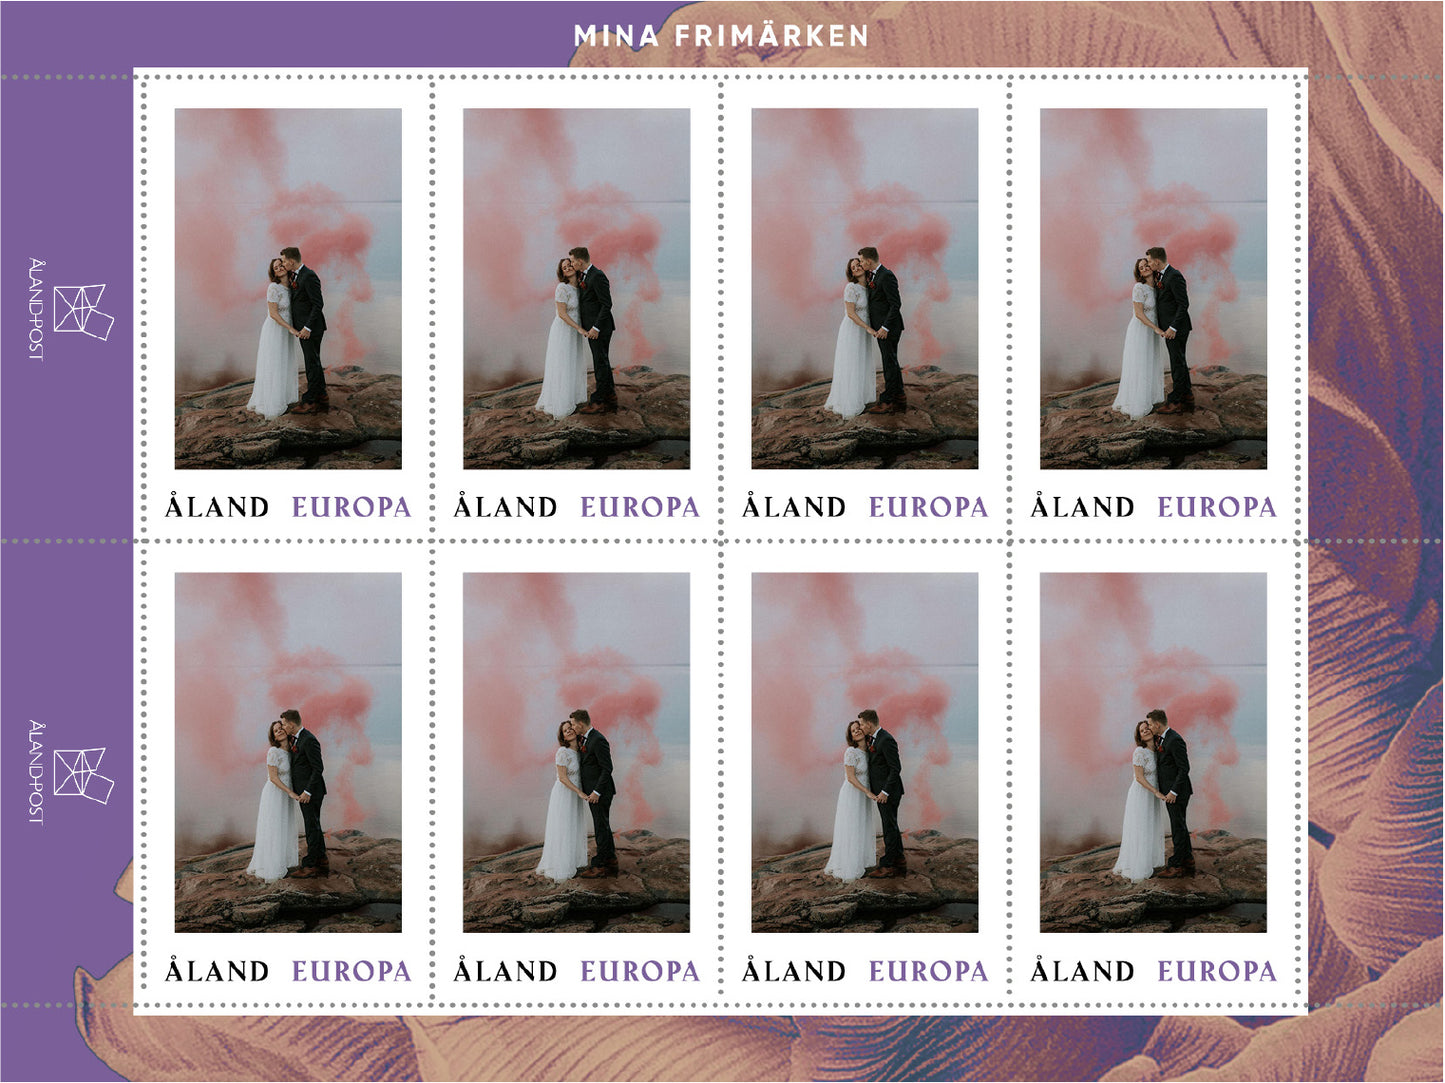 Create your own stamps, postage "Europa"